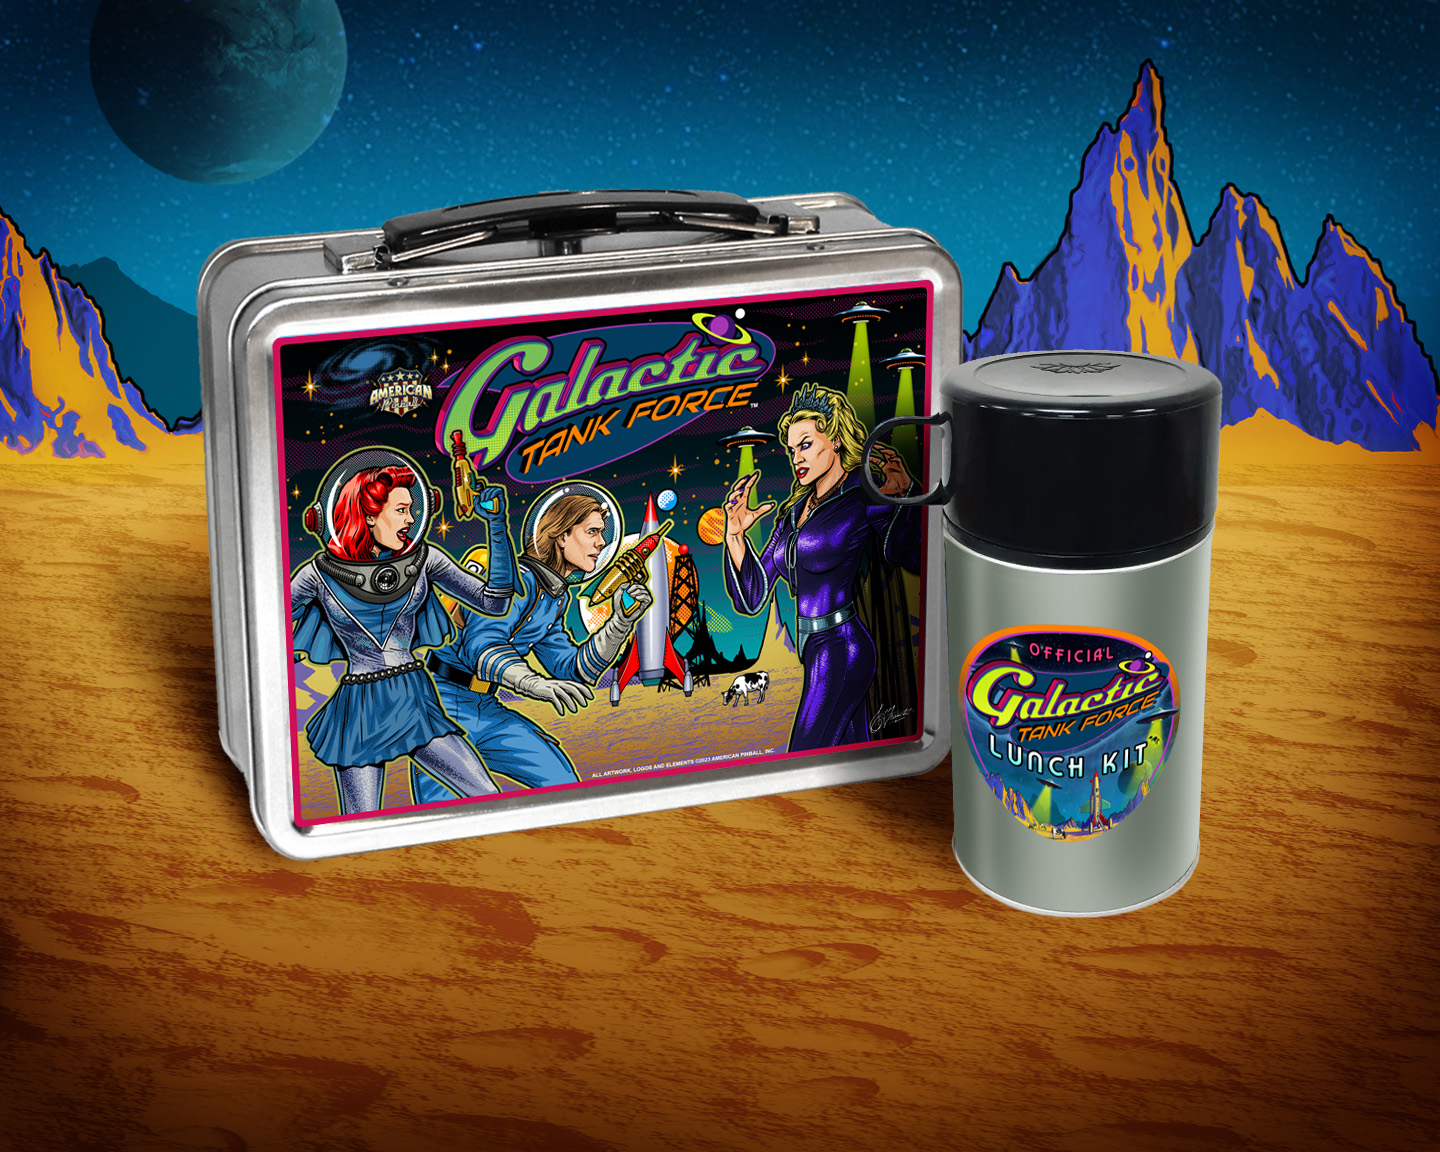 Galactic Tank Force Lunch Kit